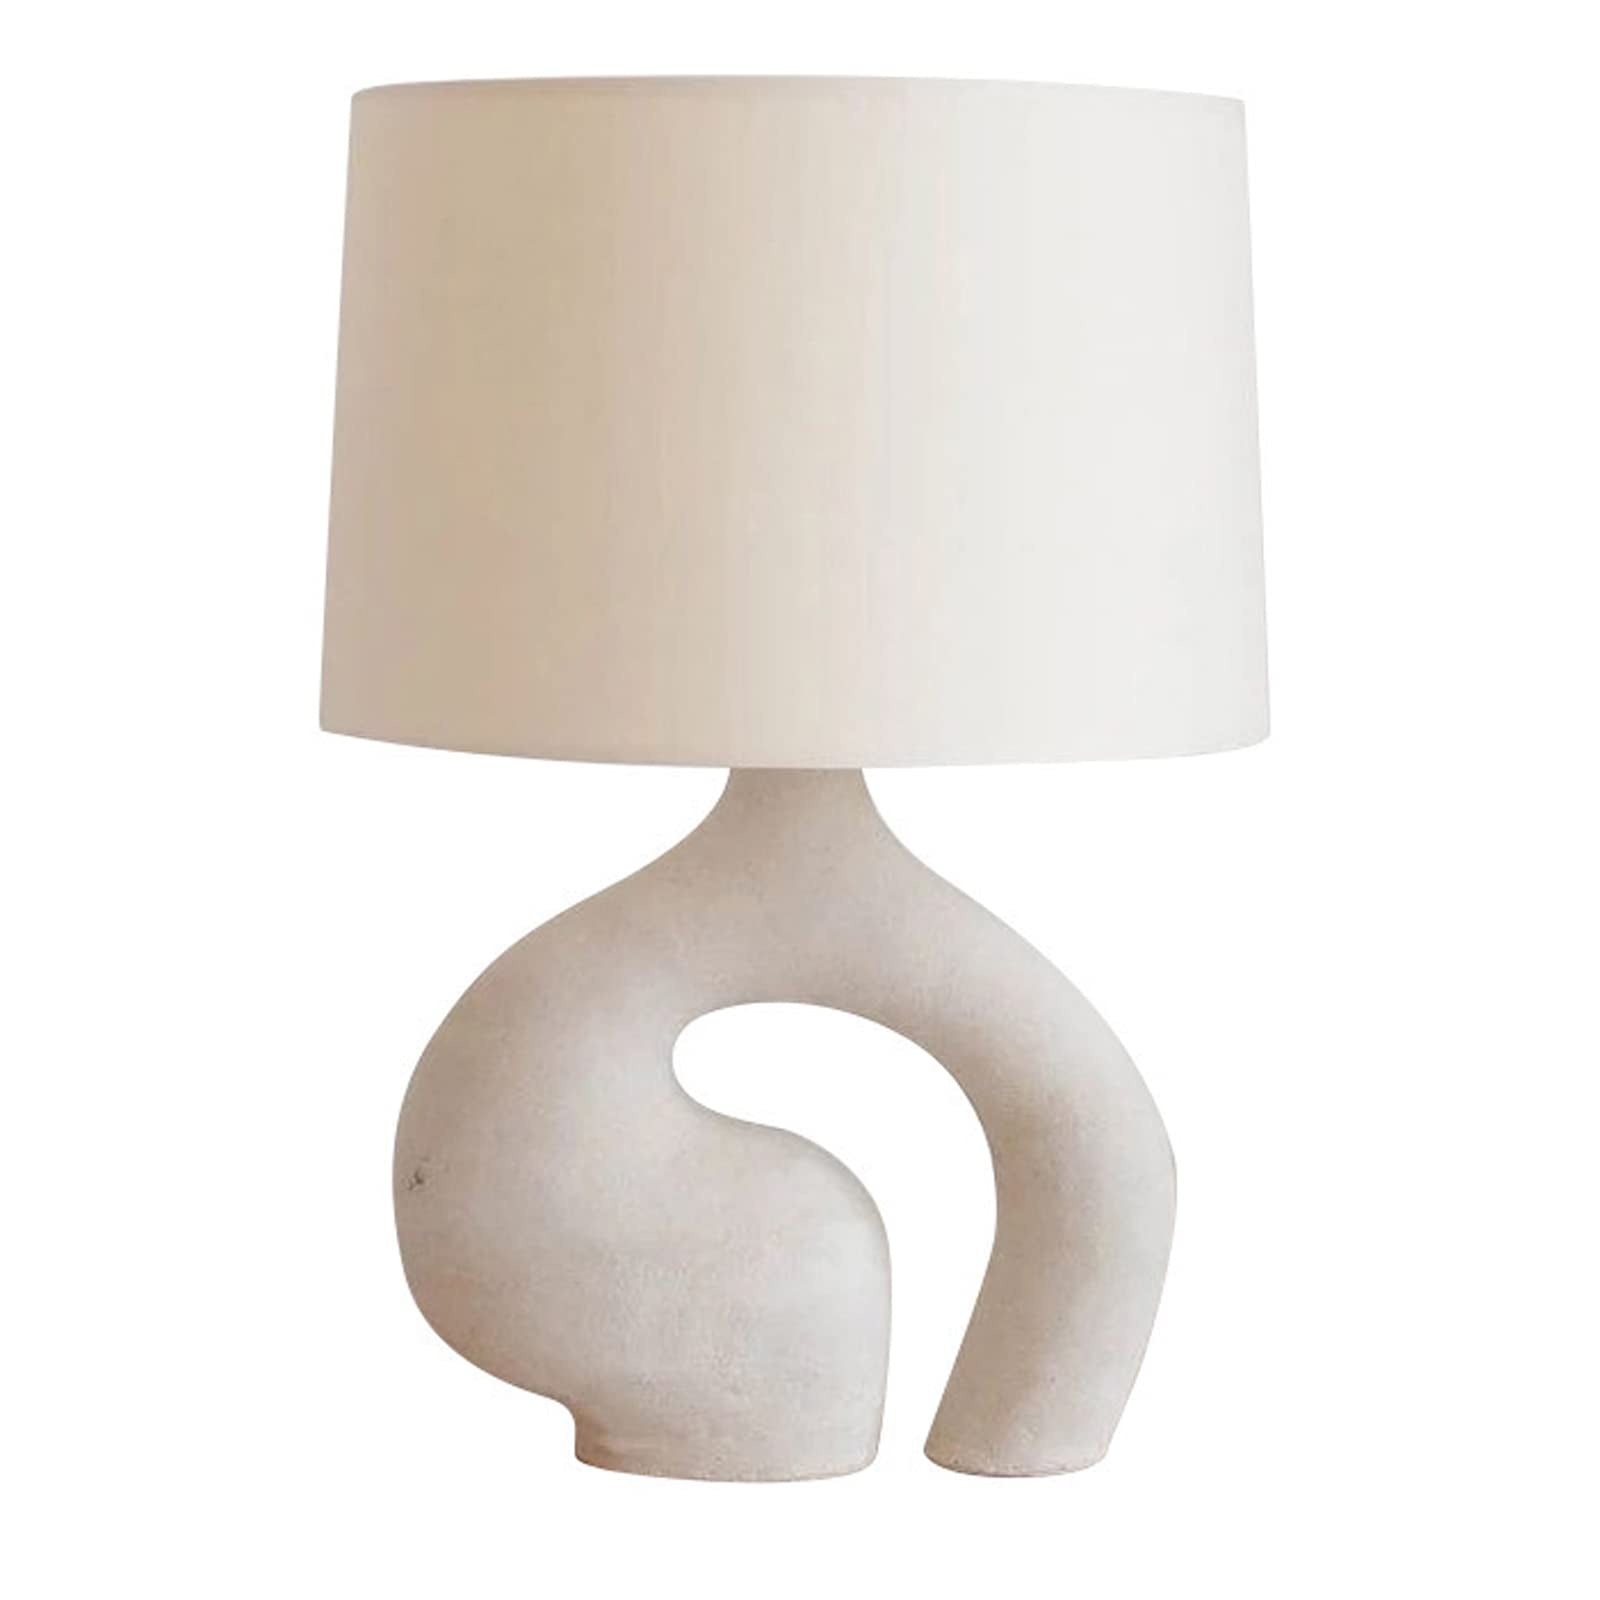 All white table lamp